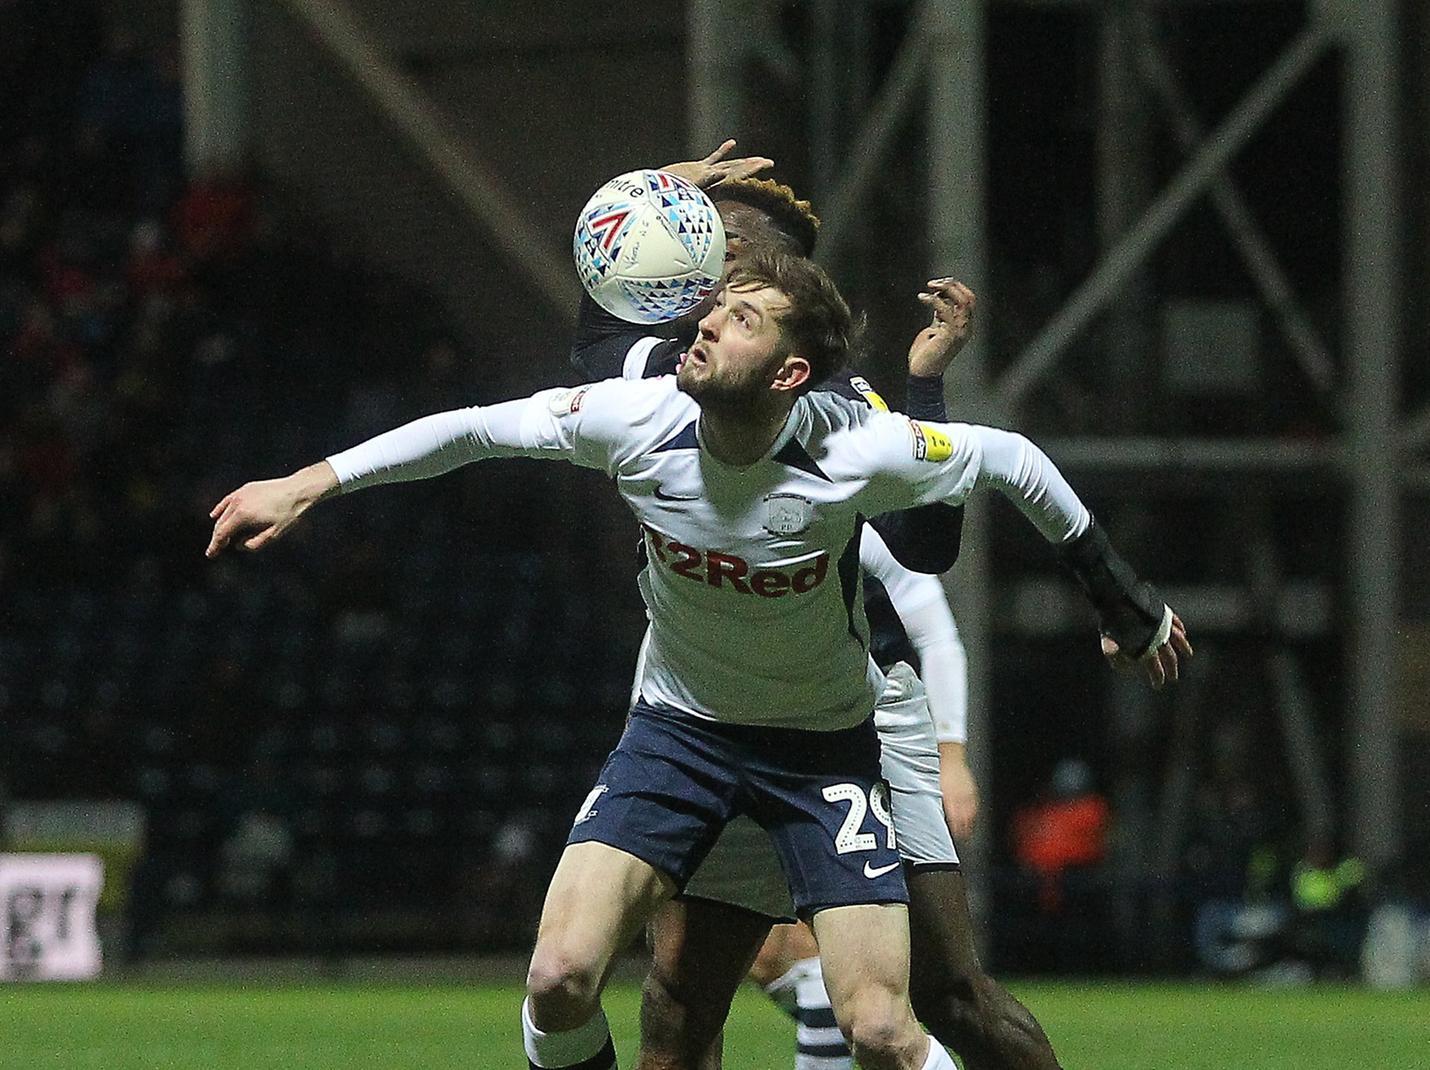 Came on for Browne as PNE switched system to get more width. Worked hard and added pace to North End's approach